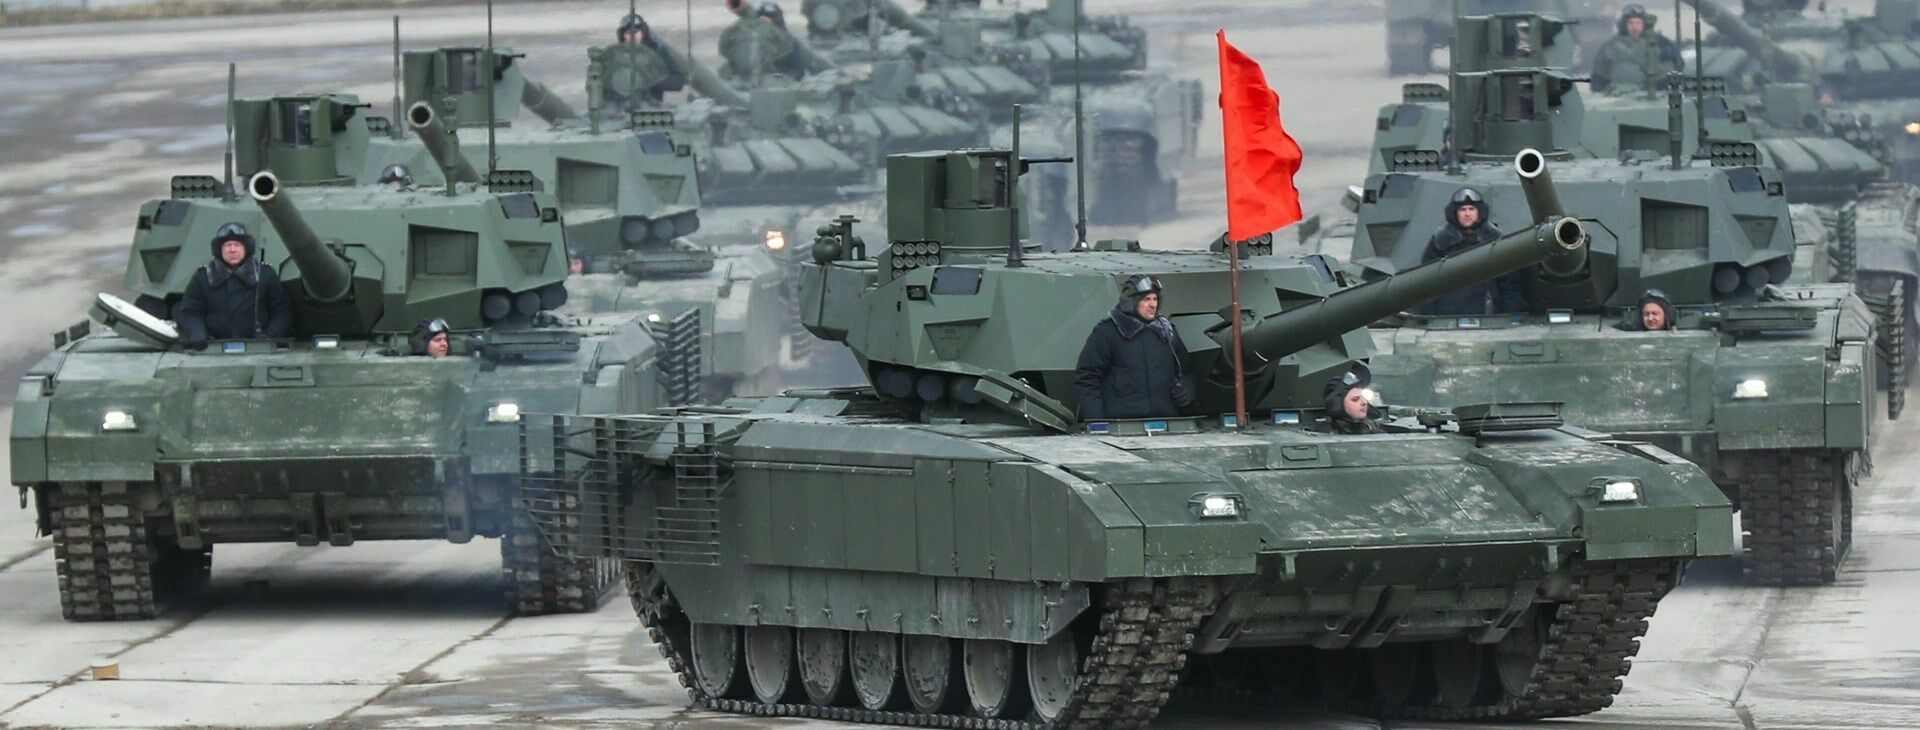 Good with everything, but too expensive: what fate awaits the Armata tank